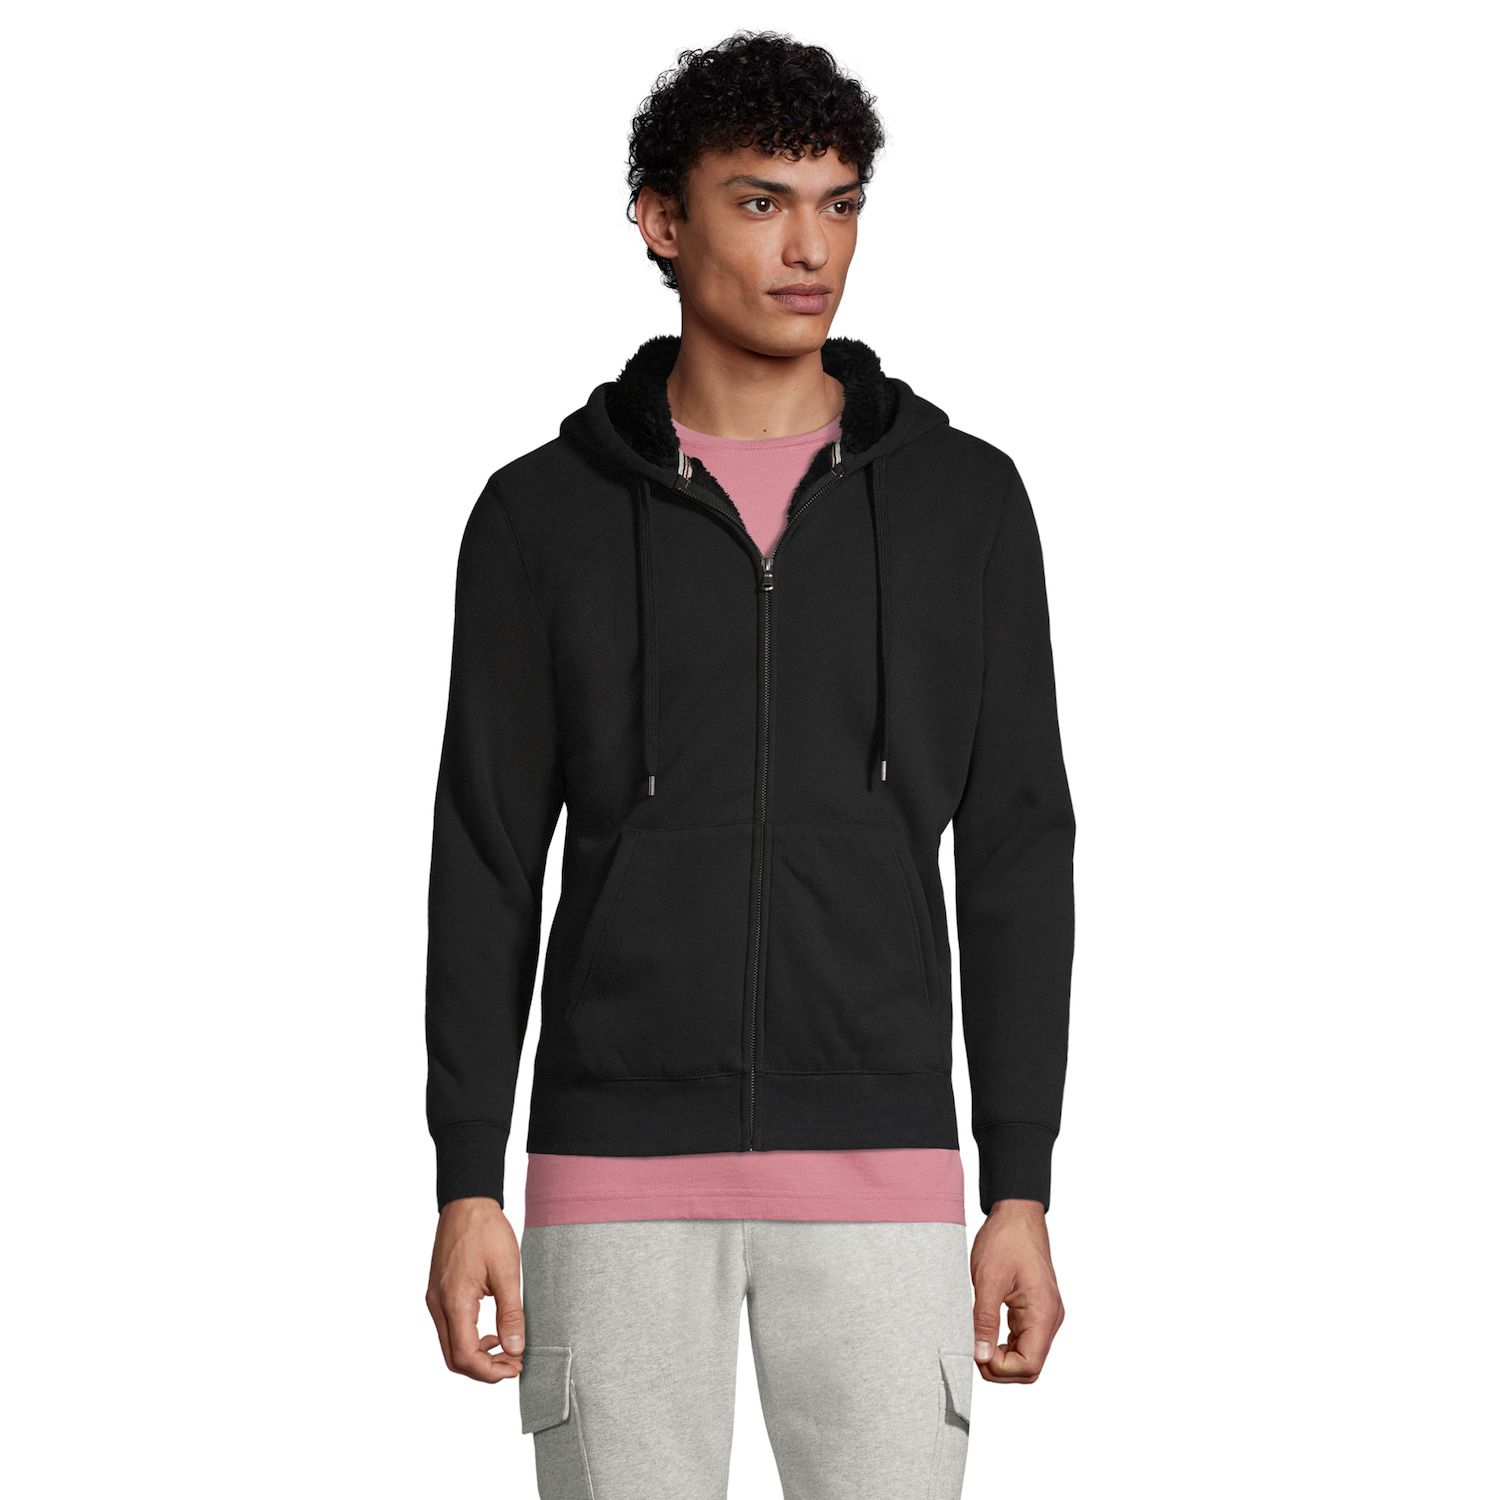 Image for Lands' End Big & Tall Serious Sweats Sherpa Fleece Full-Zip Hoodie at Kohl's.